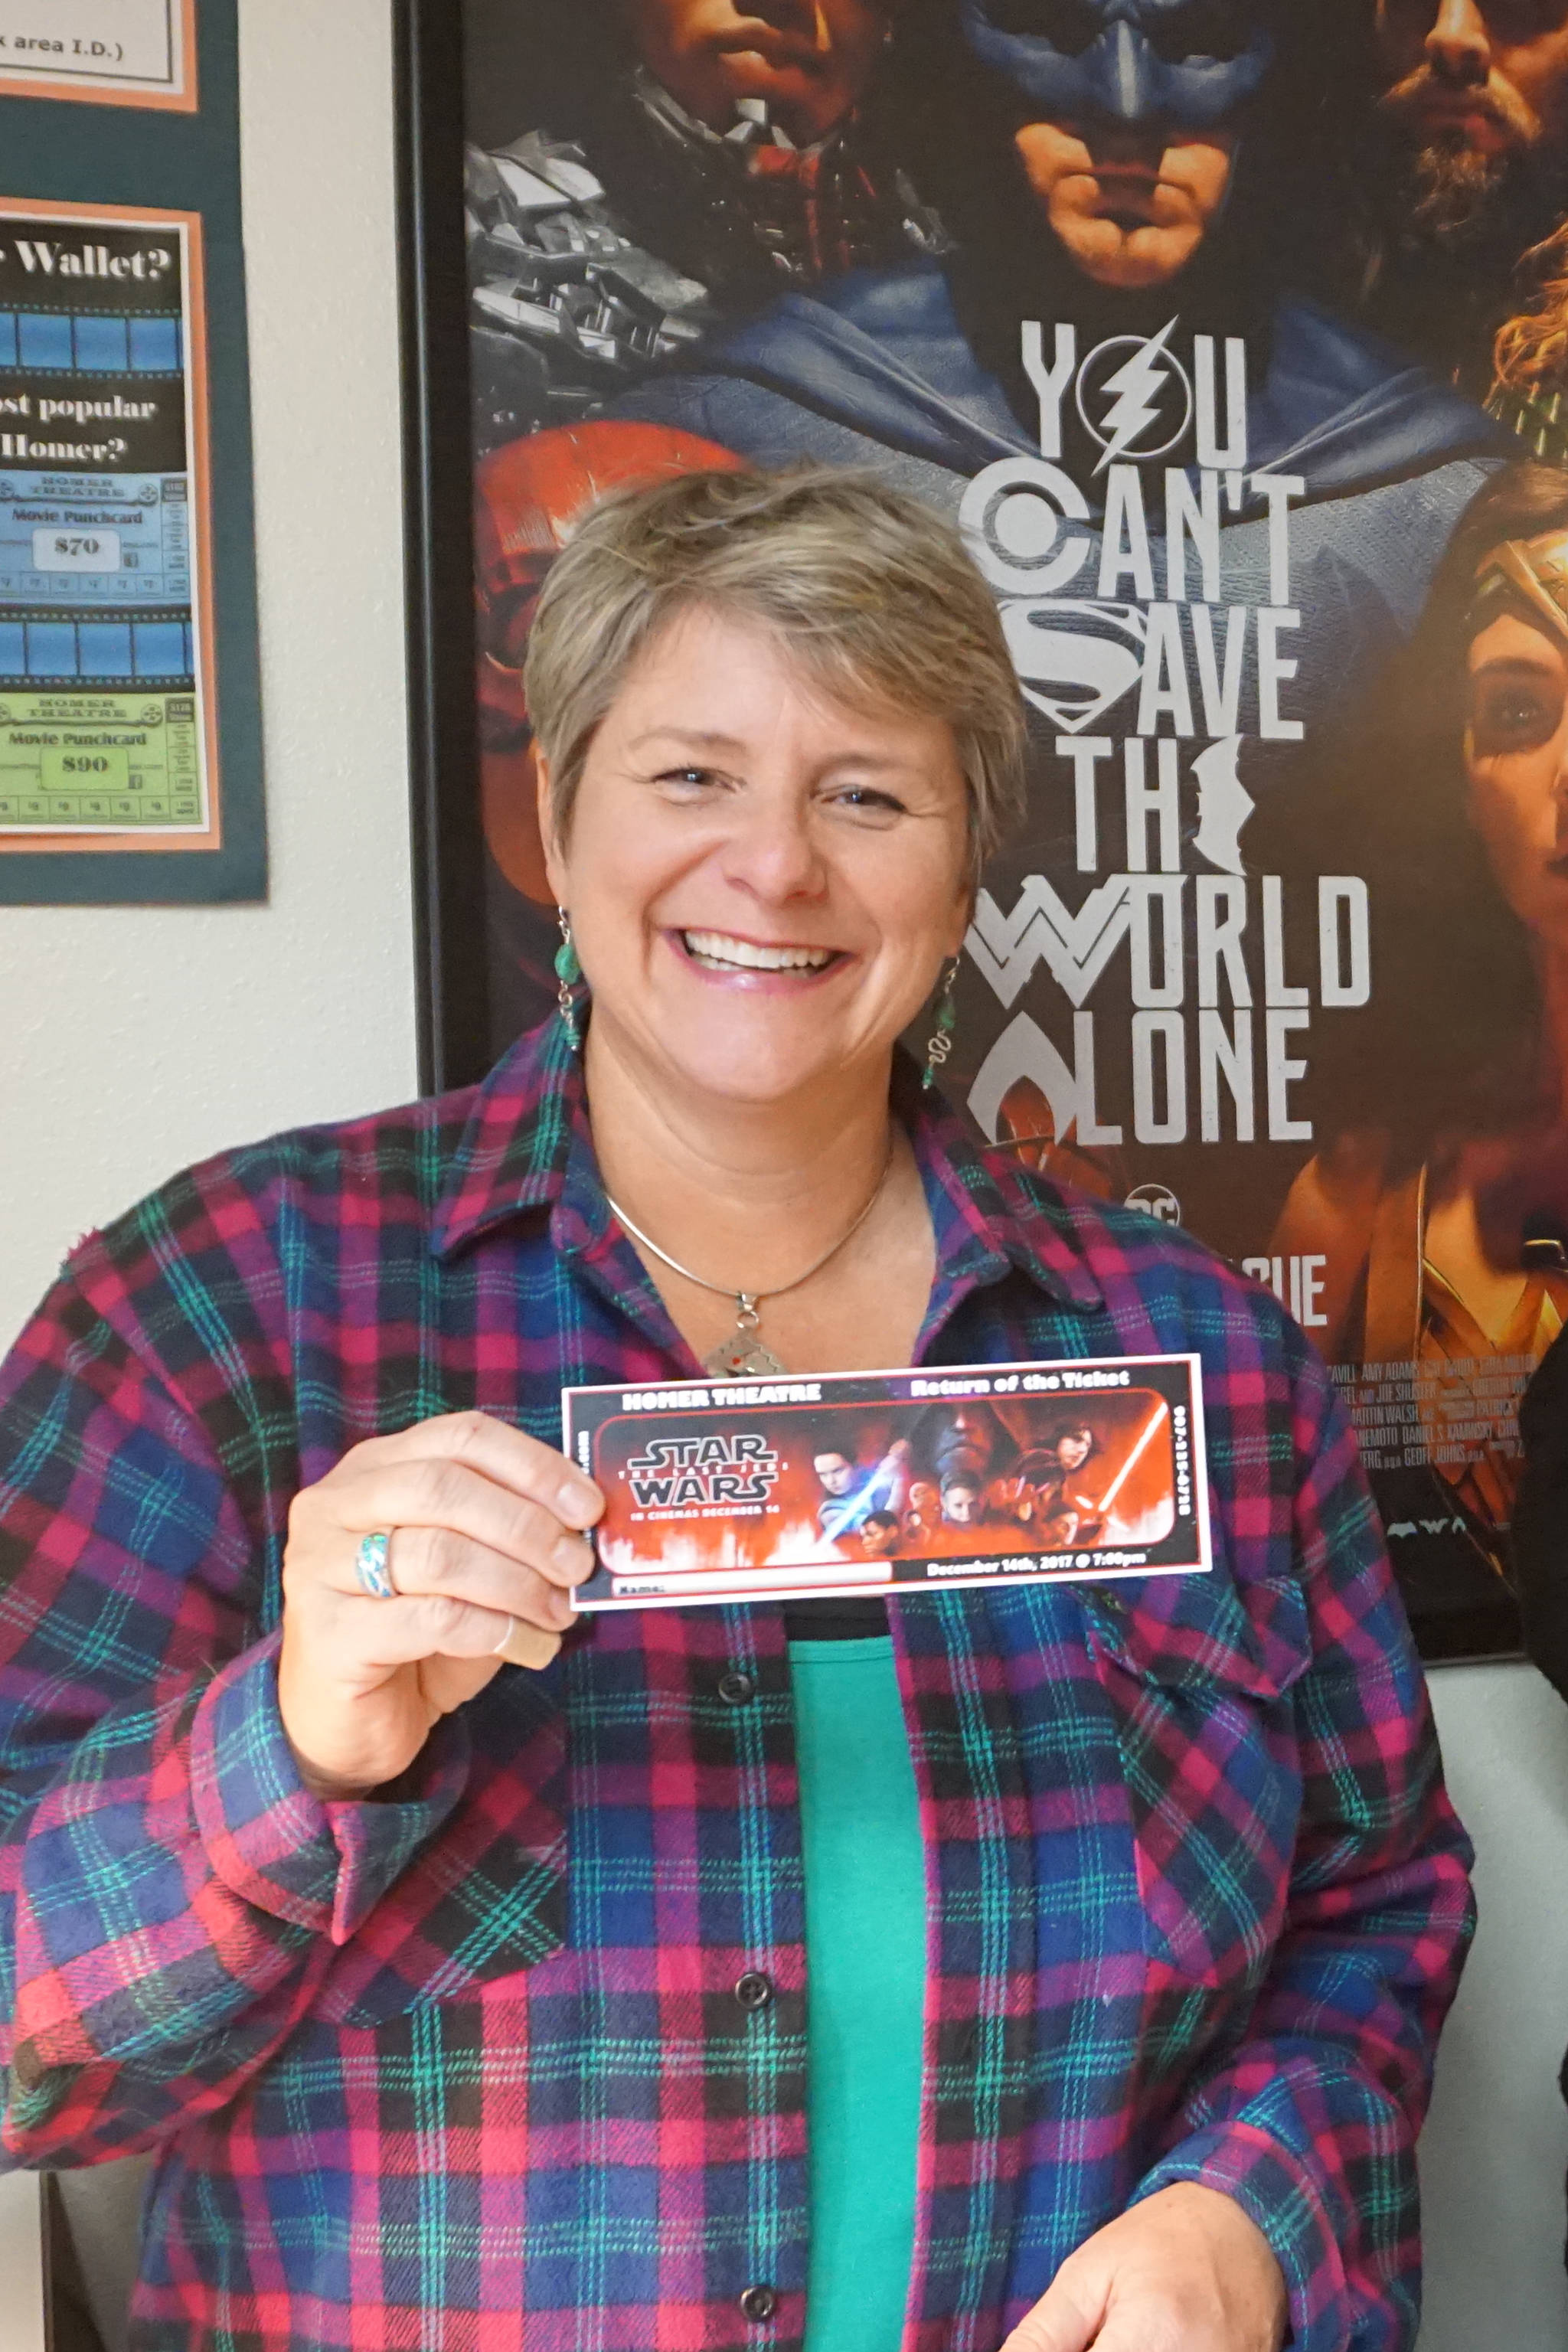 Homer Theatre manager Colleen Carroll holds up a ticket to the Homer premiere of “Star Wars: The Last Jedi” after tickets went on sale Saturday, Dec. 2, 2017 at the theatre in Homer, Alaska. The gala opening night is Dec. 14. (Photo by Michael Armstrong, Homer News)